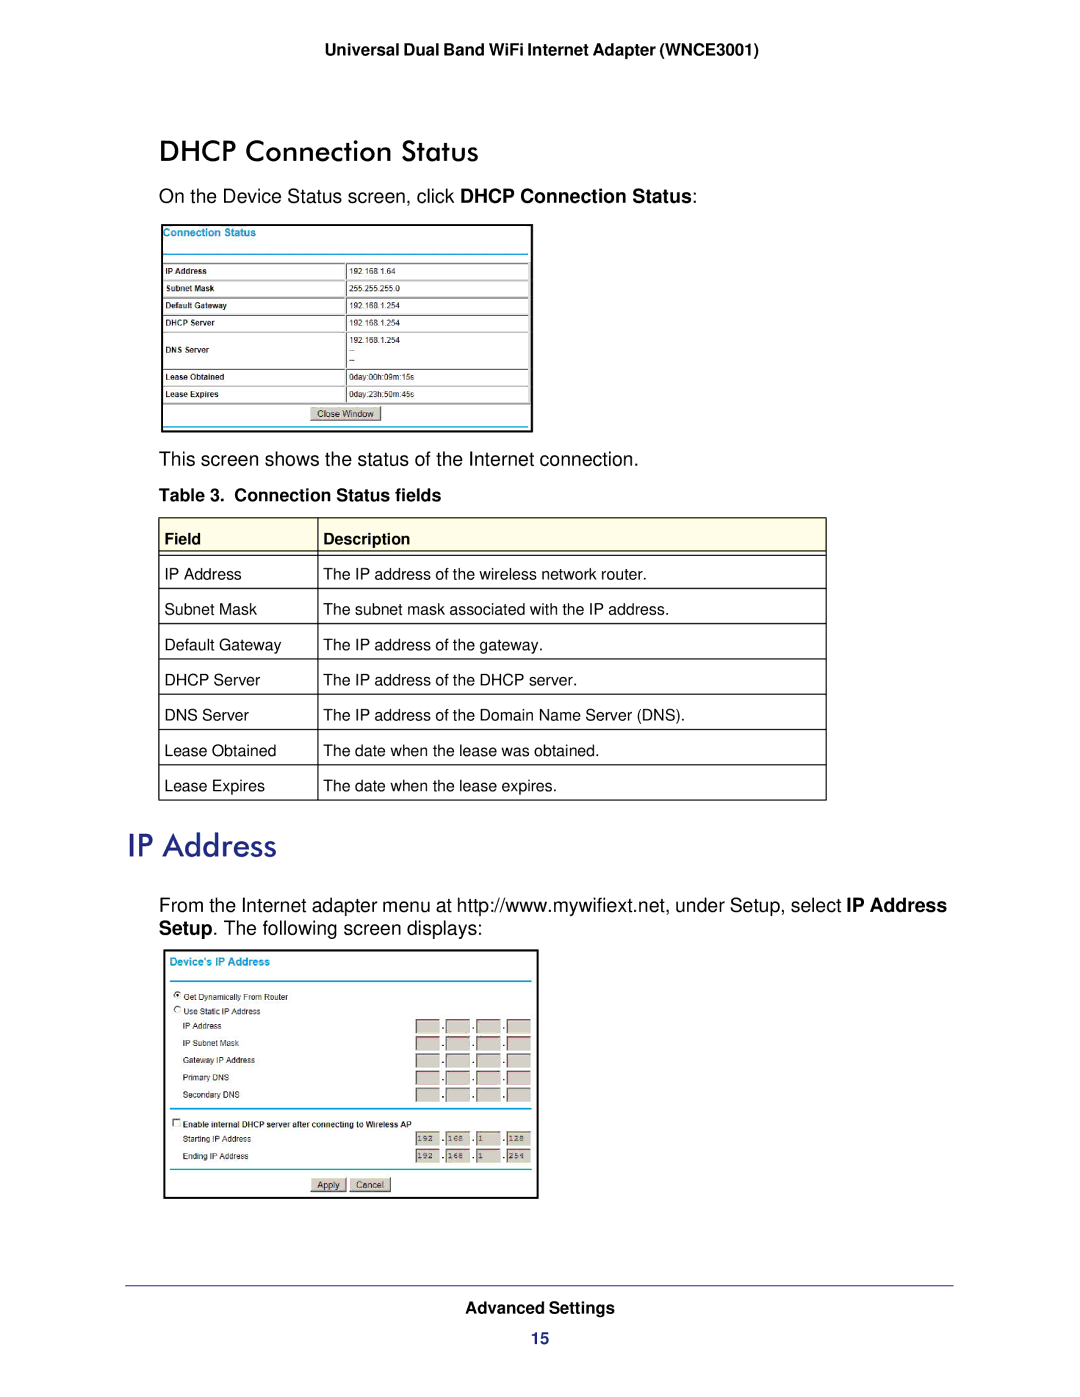 NETGEAR WNCE3001-100NAS user manual IP Address, Dhcp Connection Status, Connection Status fields 